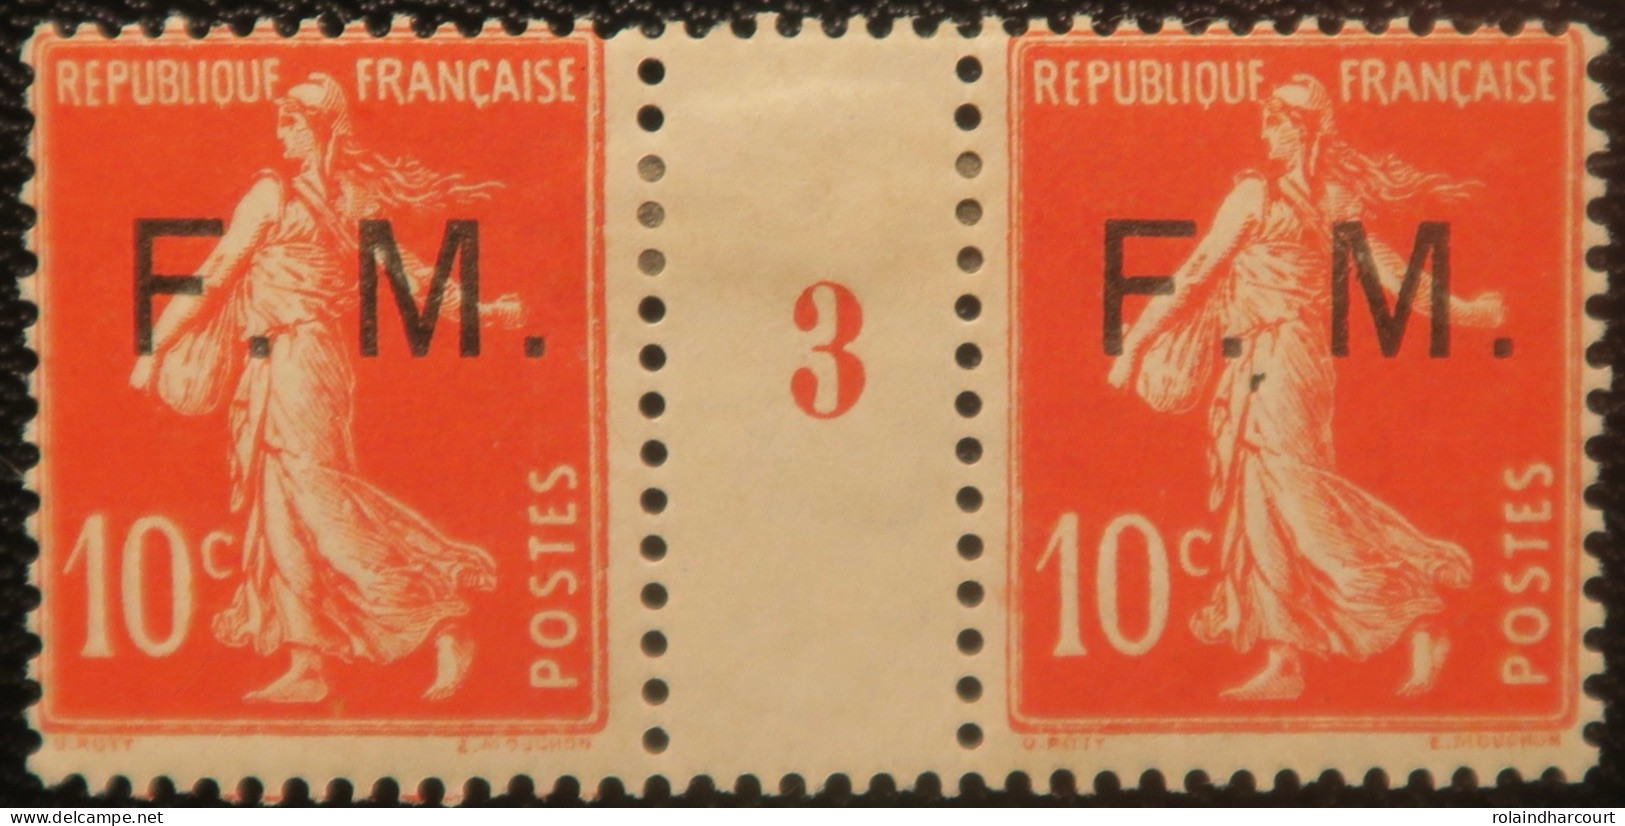 LP2943/83 - FRANCE - 1913 - TYPE SEMEUSE CAMEE - F.M. - N°5 Mill 3 TIMBRES NEUFS* - Millesimi